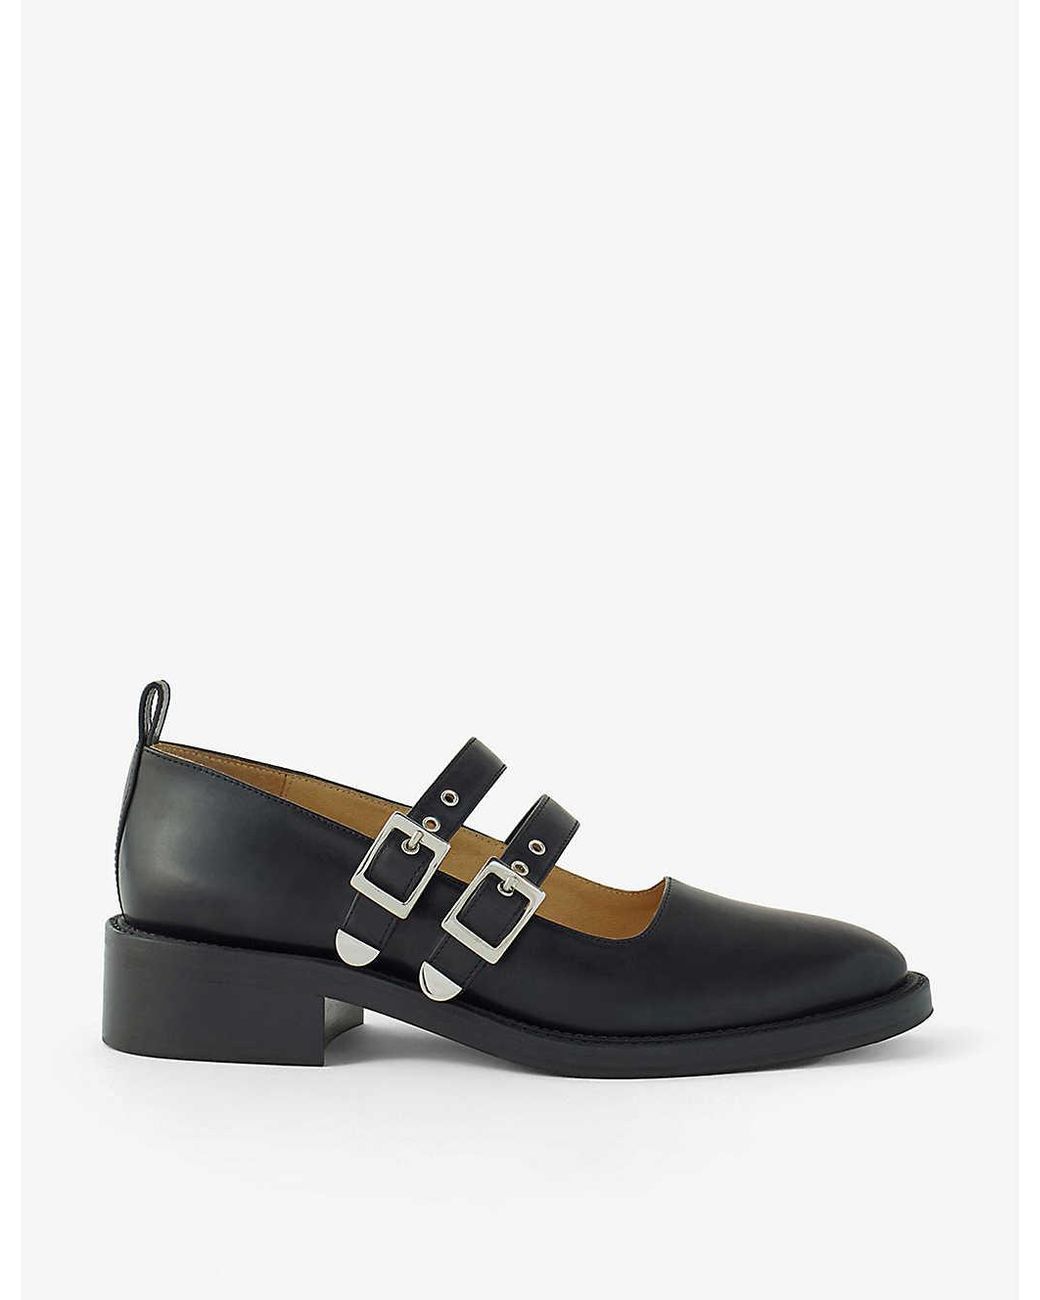 Maje Fifi Leather Mary Jane Shoes in Black | Lyst Canada